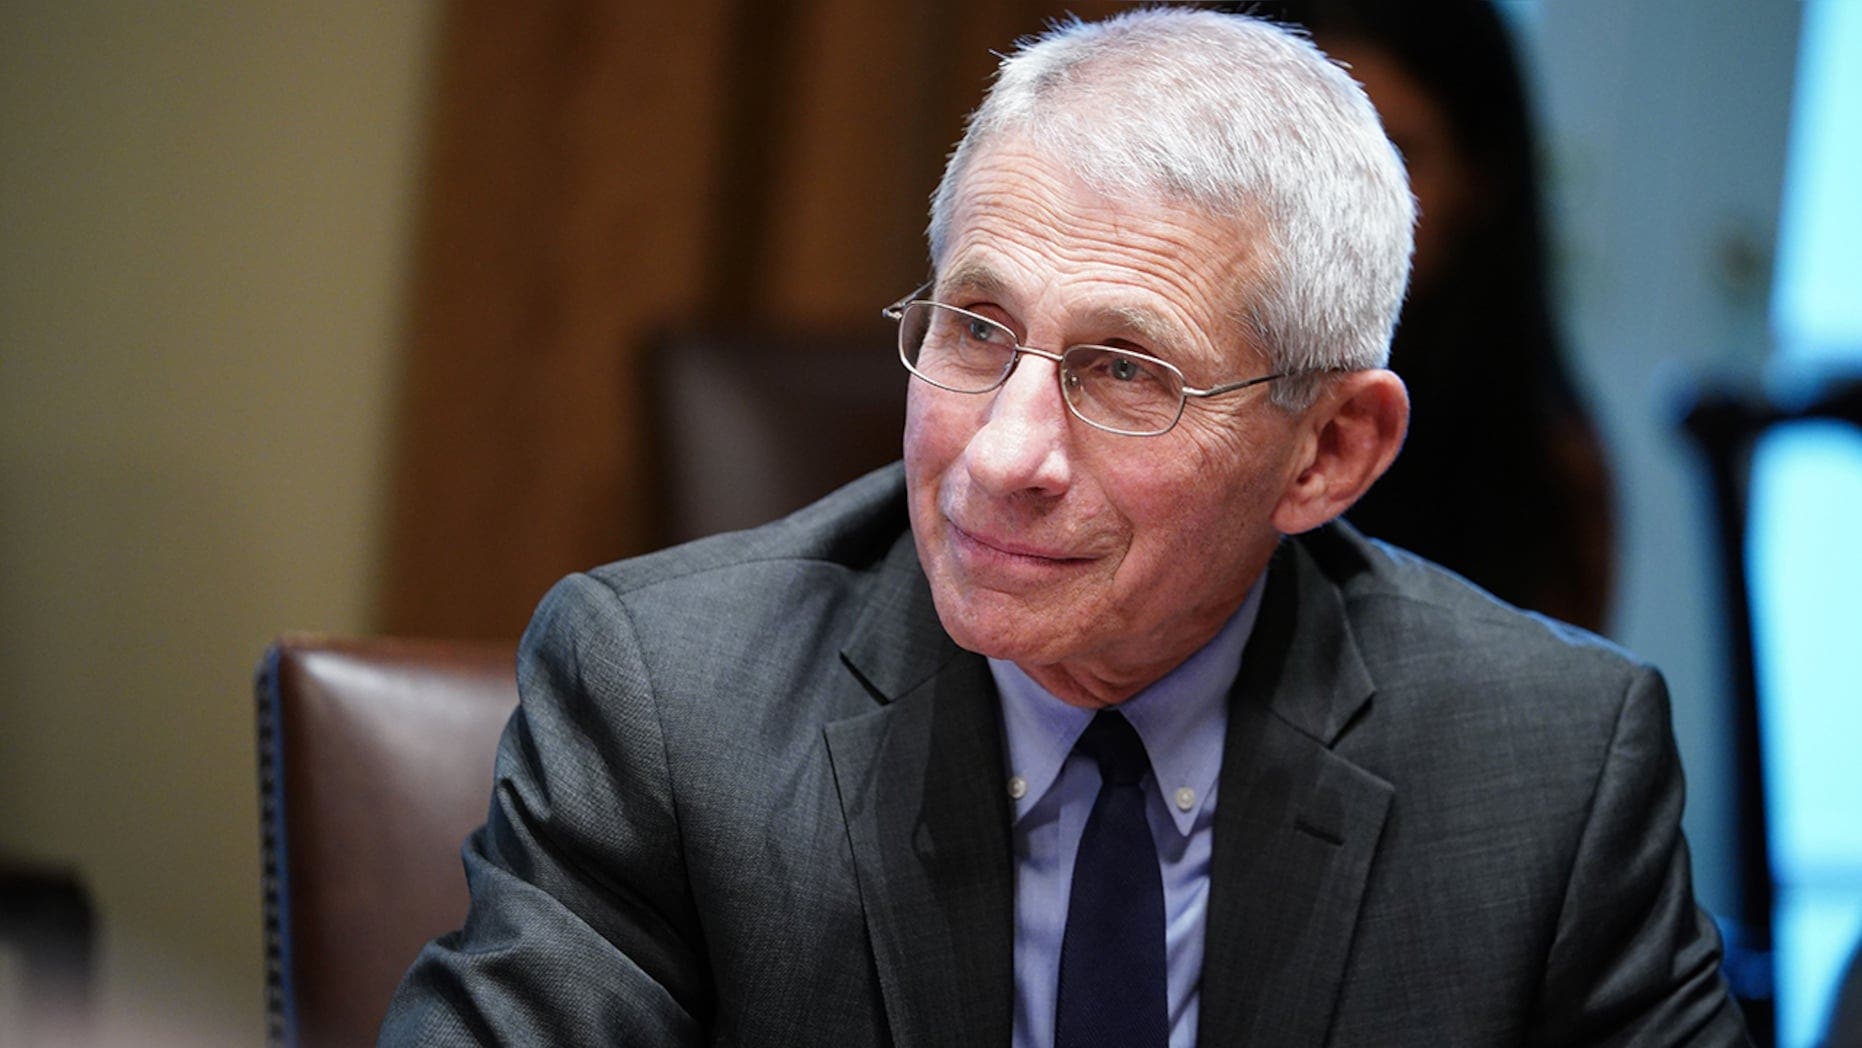 Fauci laughs at the pandemic dating term he inspired: ‘I’m going to make Fauci for you!’